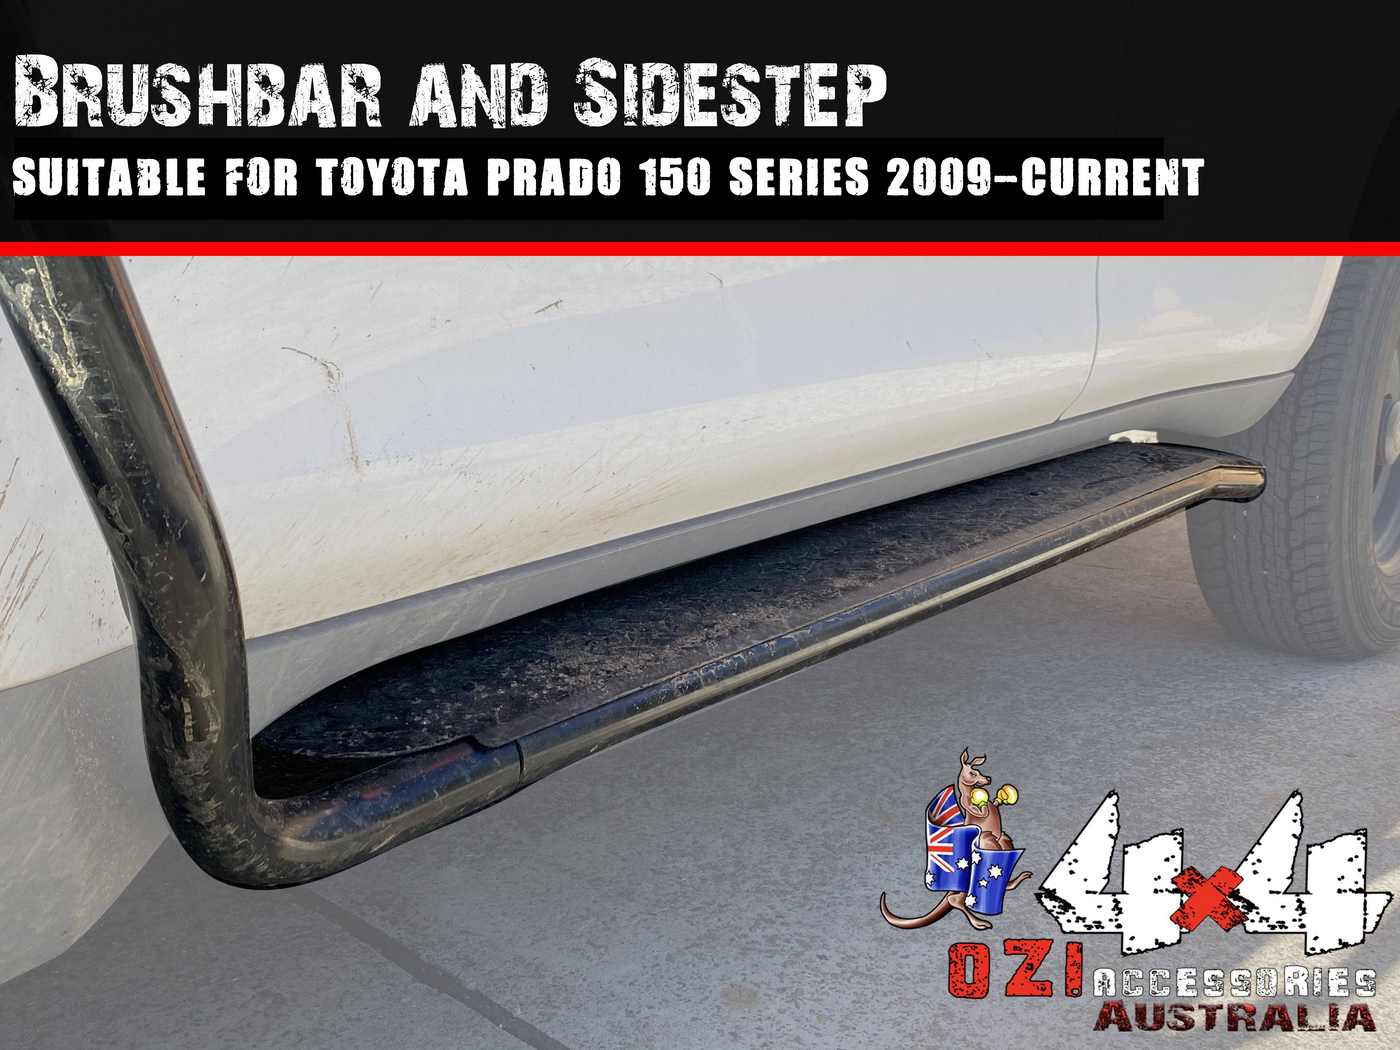 Side Steps & Brush Bars Suitable For Toyota Land Cruiser Prado 150 series 2009-Current (Clearance Sale) - OZI4X4 PTY LTD